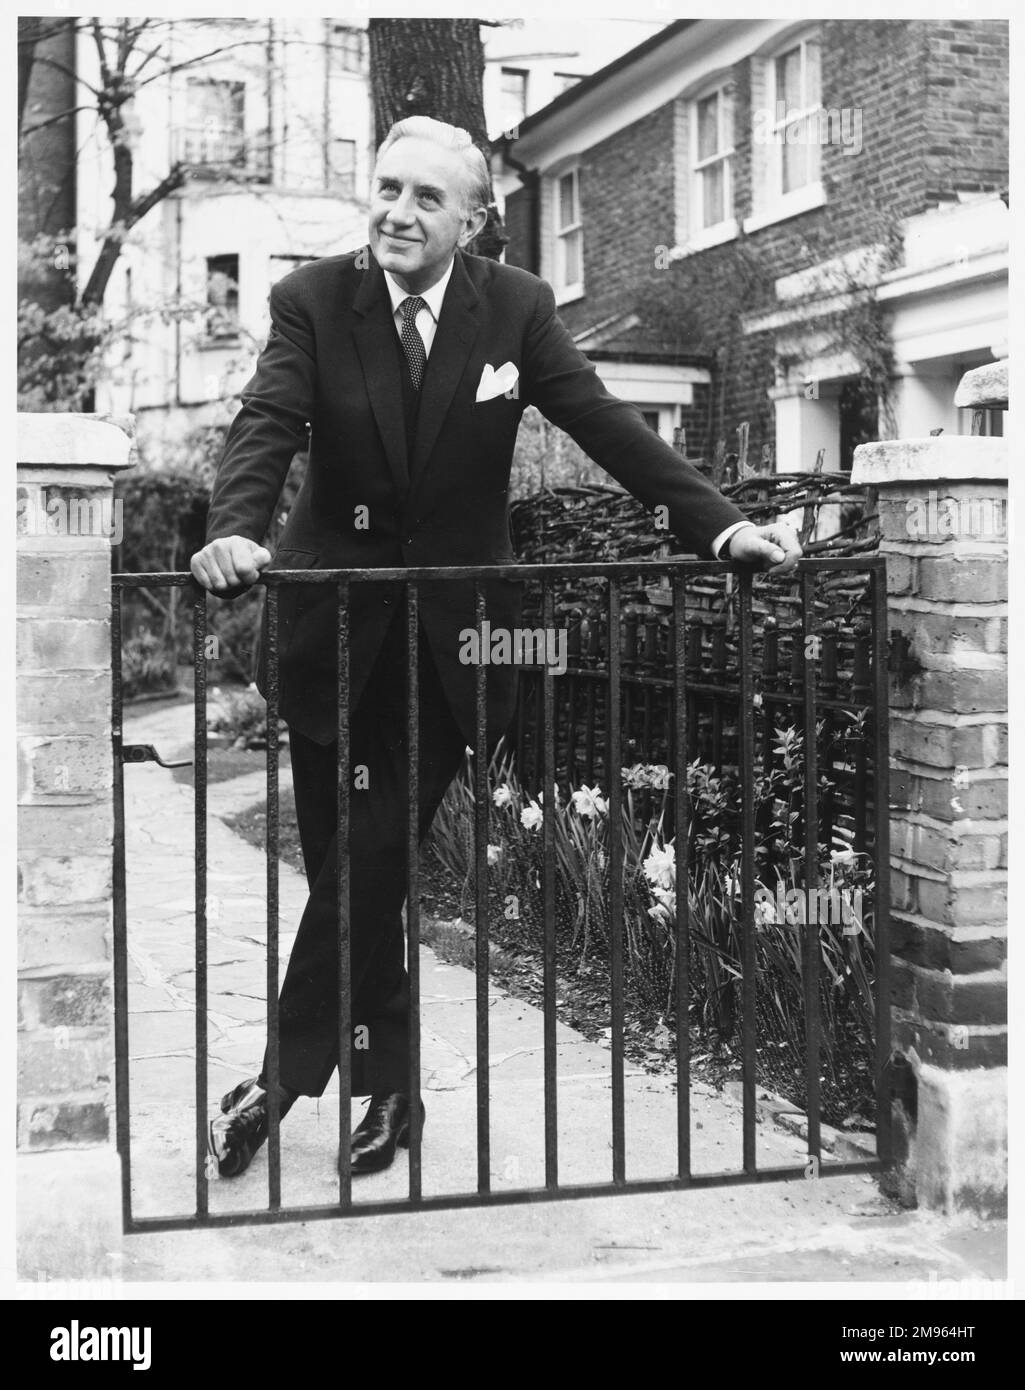 A mature man in a three piece suit poses behind a garden gate. Stock Photo